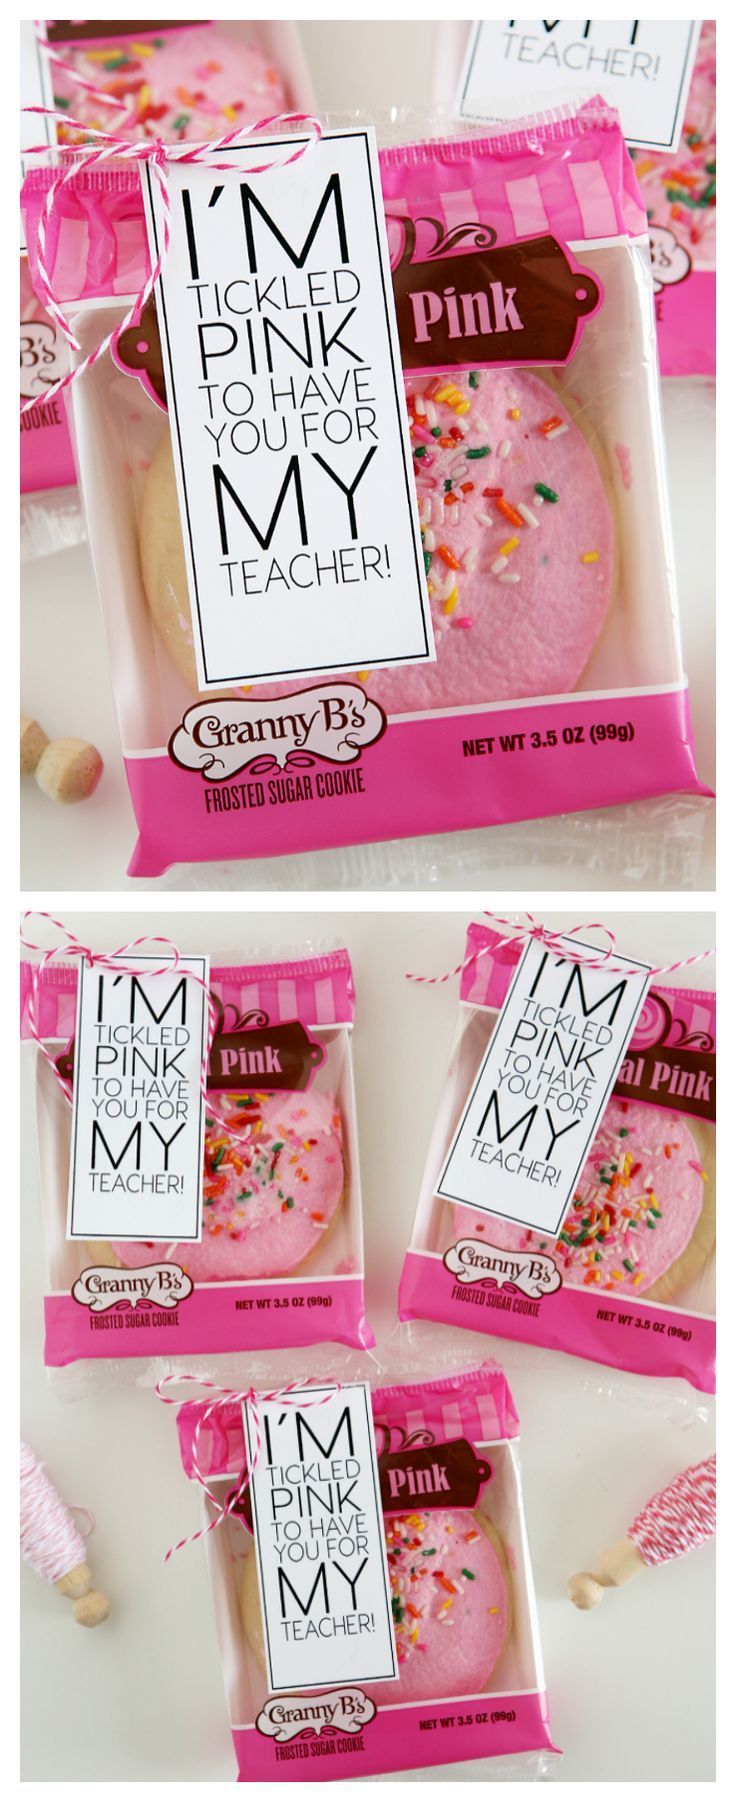 I'm Tickled Pink To Have You For My Teacher | Teacher Gift